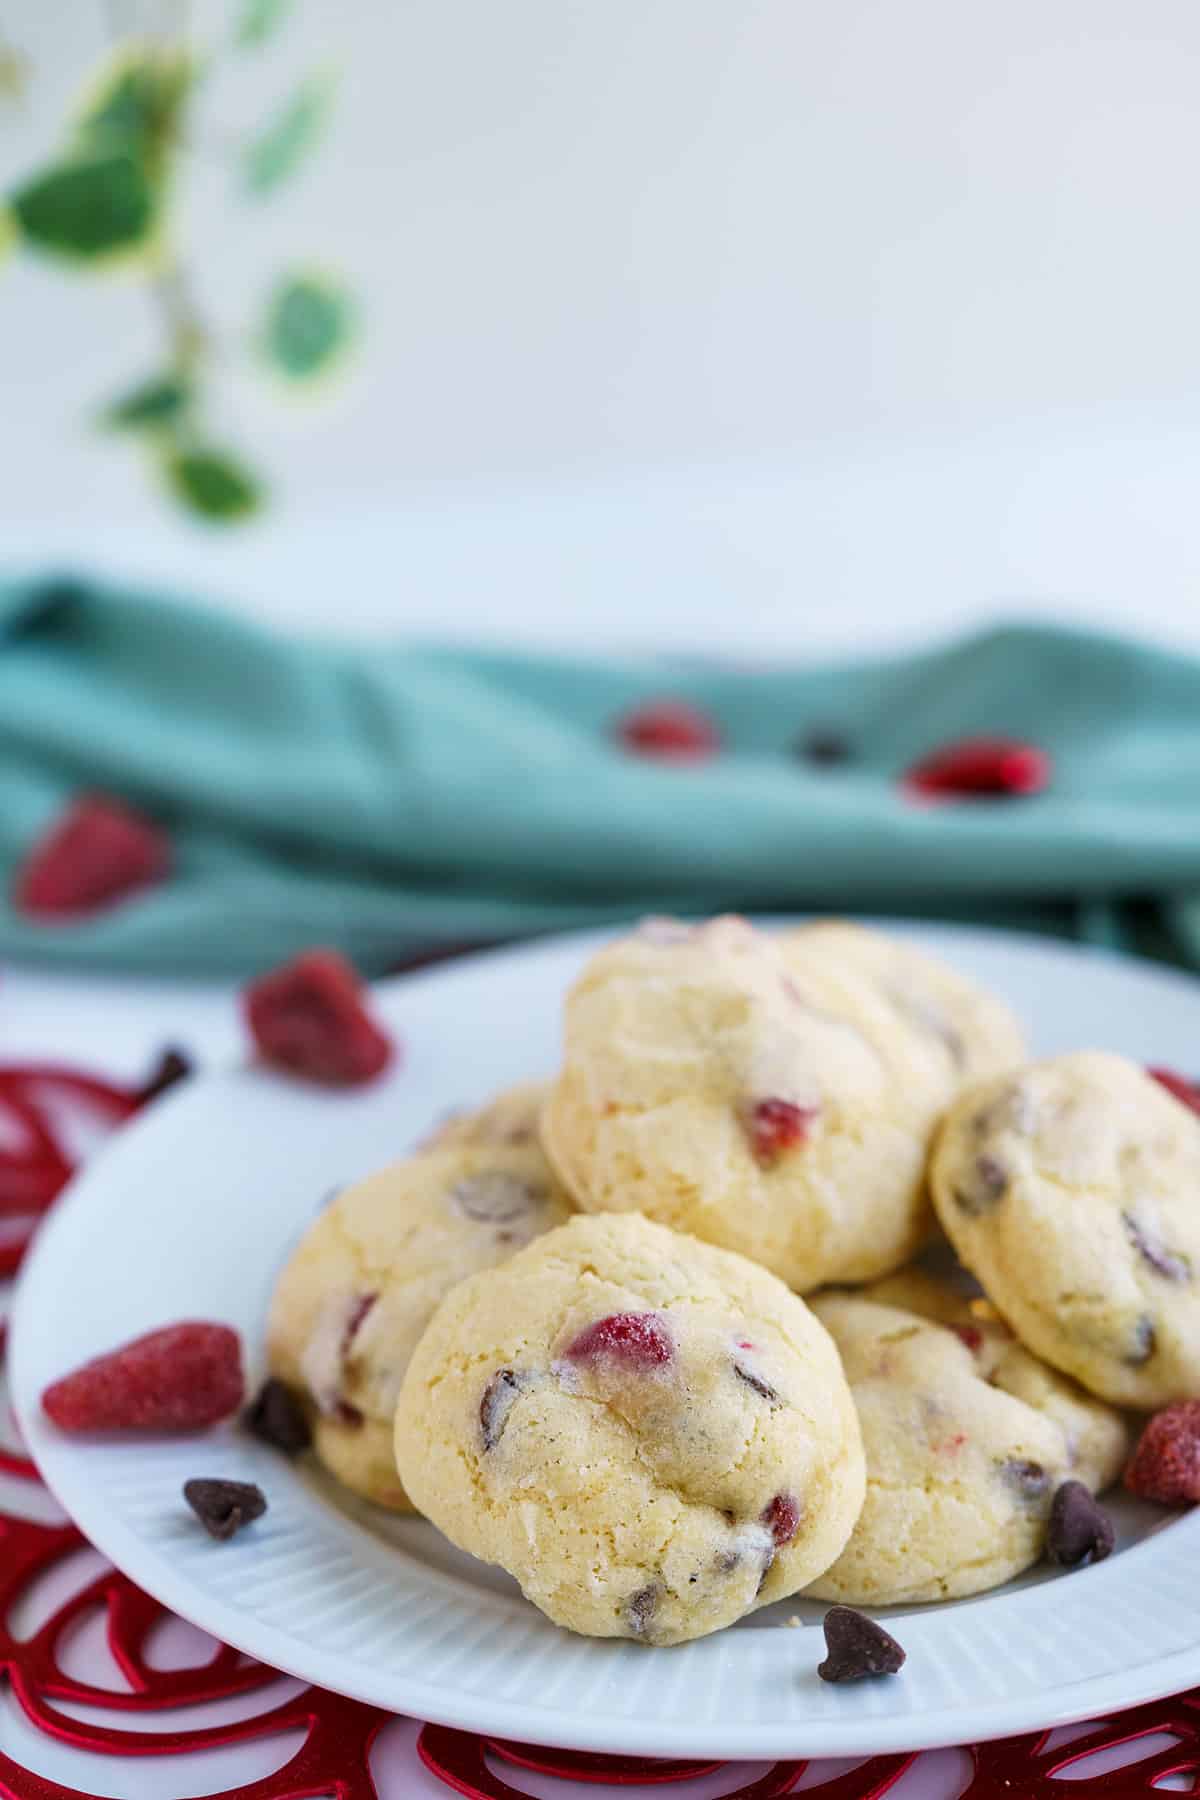 Chocolate chips and strawberry cookies on a plate with leaves in the background.